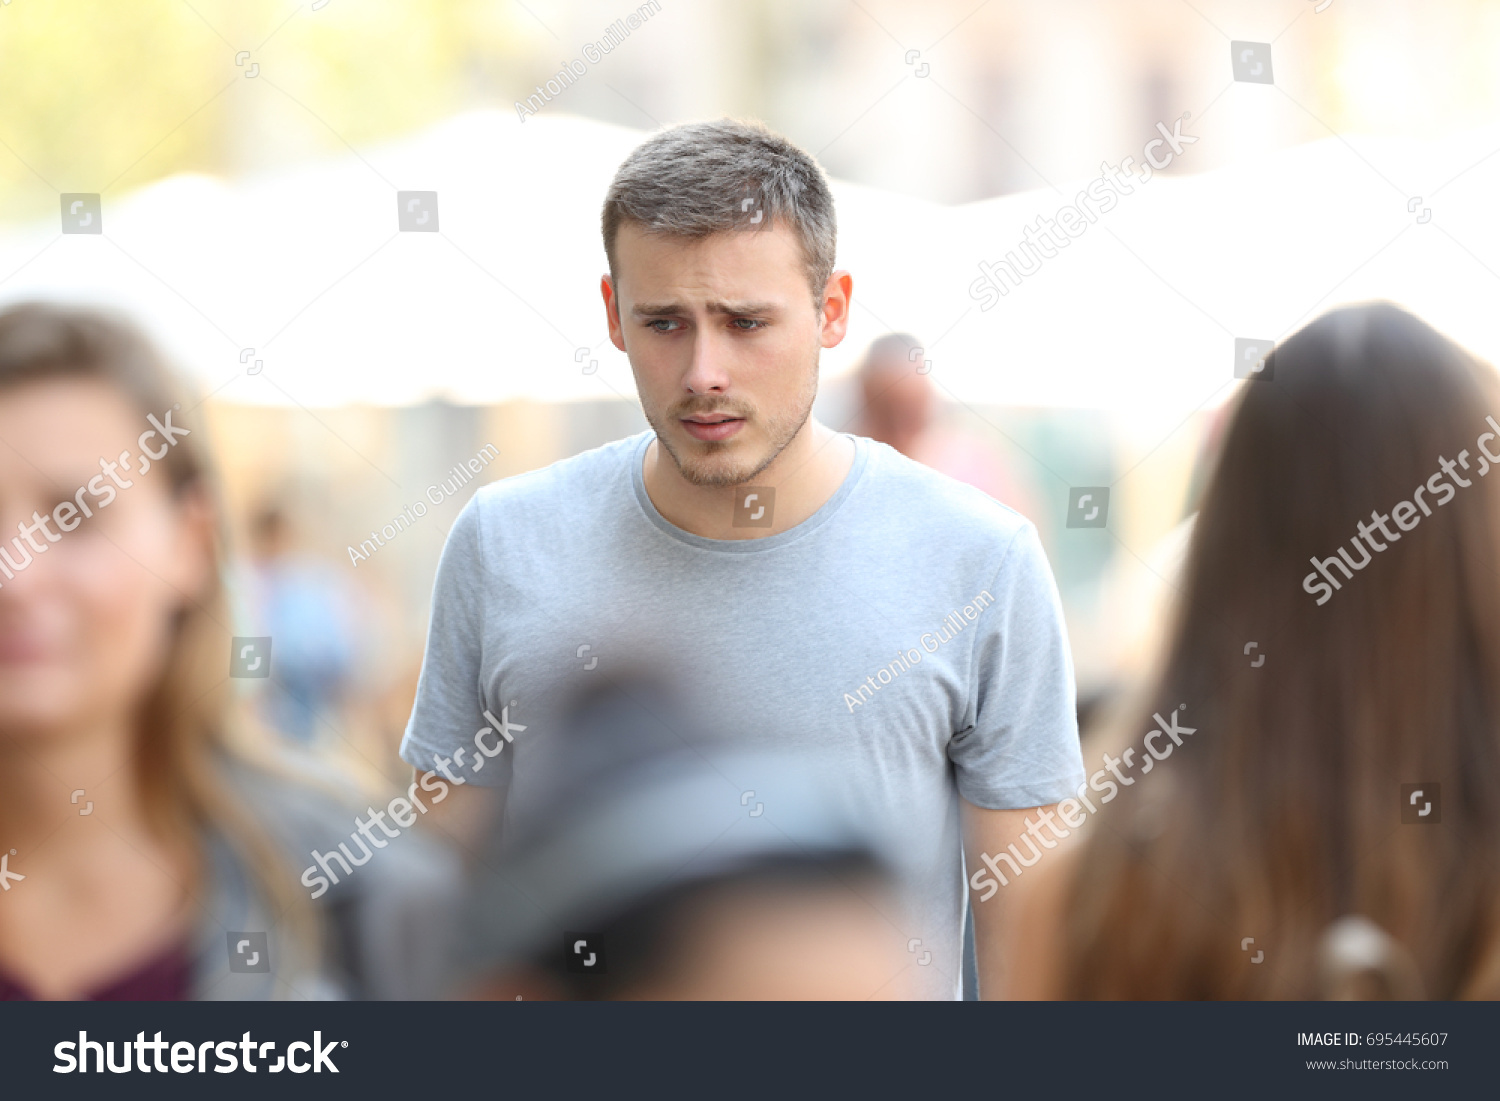 Front view portrait of a sad boy walking on the street #695445607